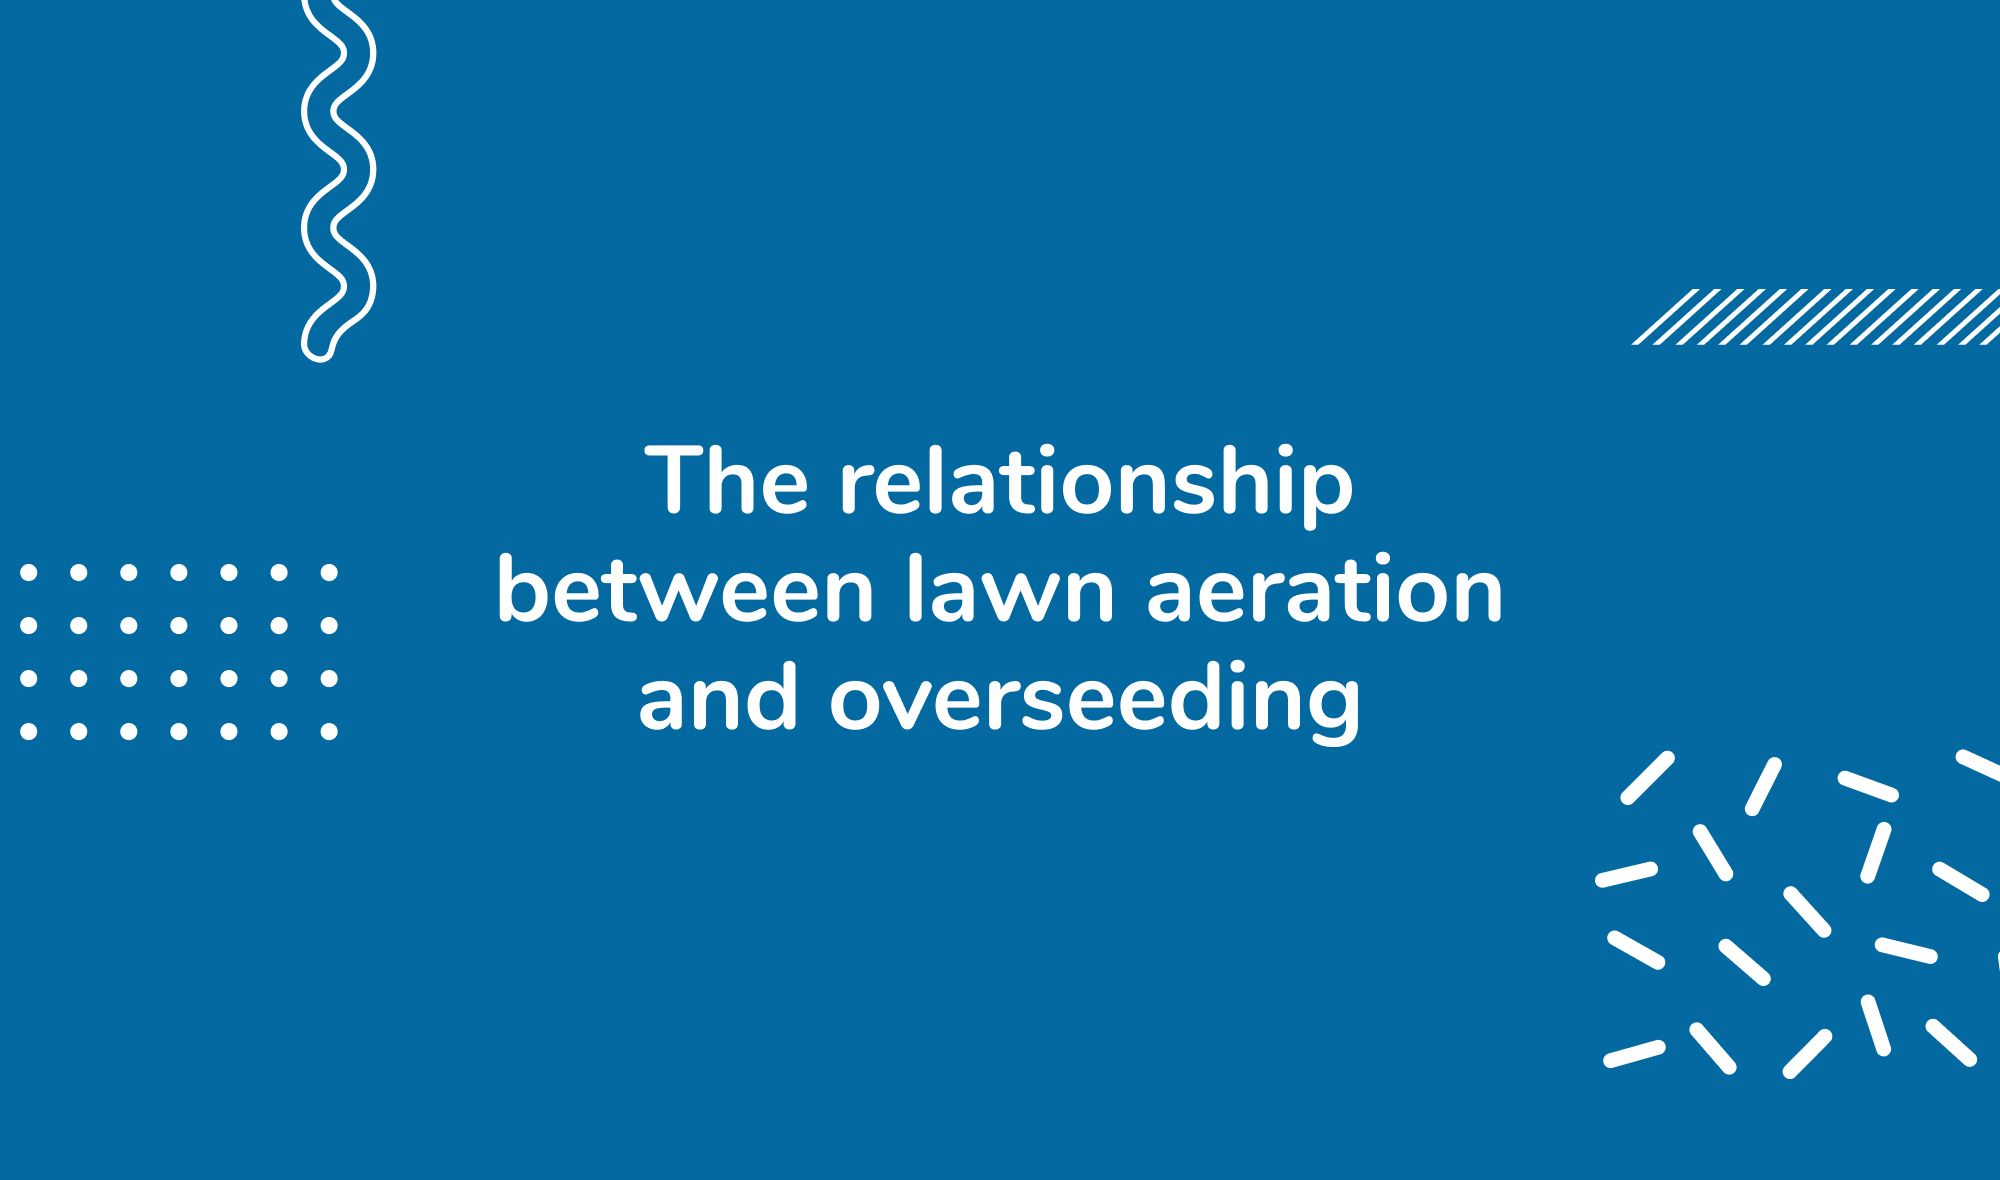 The relationship between lawn aeration and overseeding